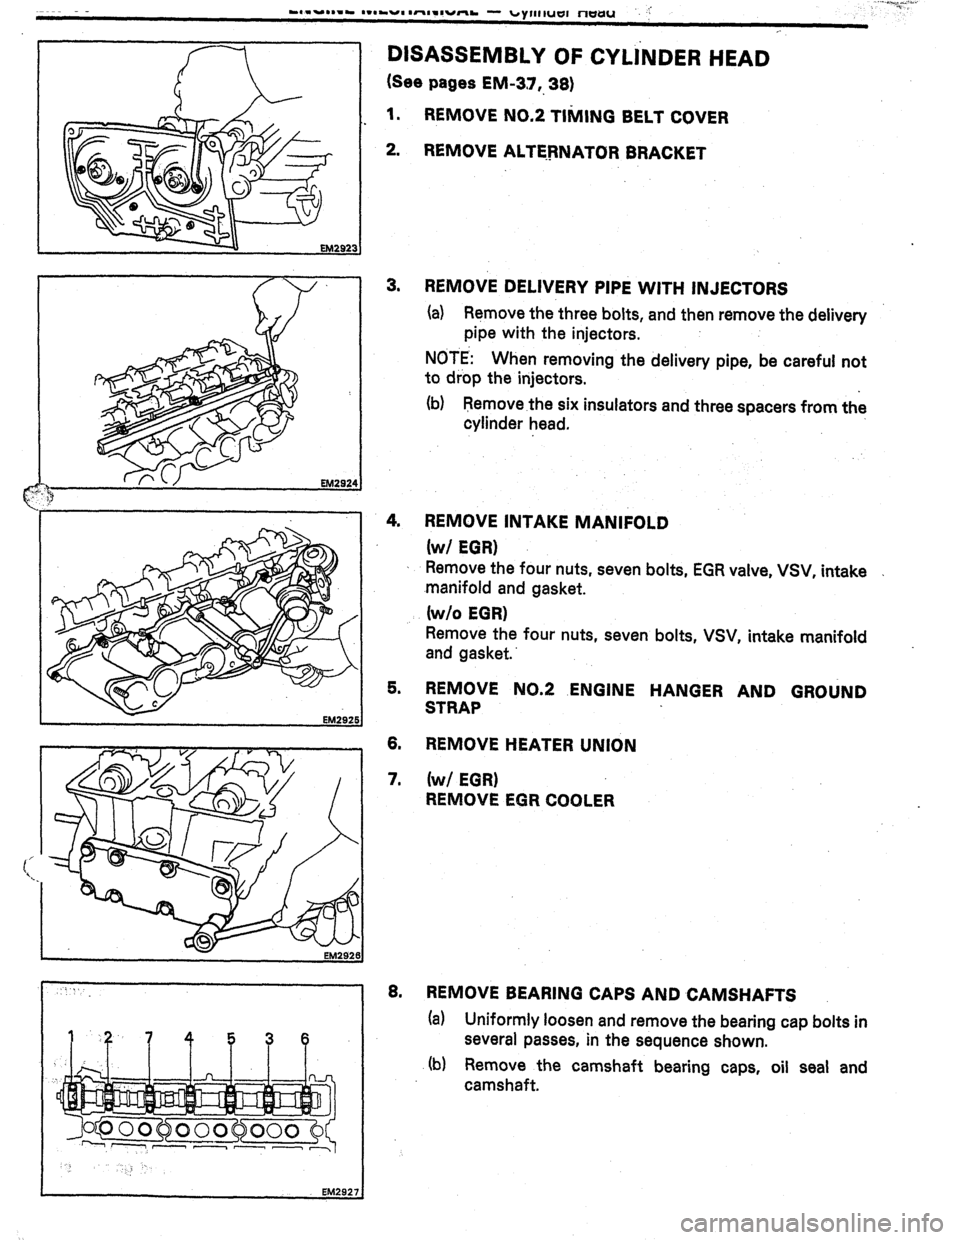 TOYOTA CELICA 1987  Service Repair Manual EM2921 
DISASSEMBLY OF CYLiNDER HEAD 
(See pages EM-3.7,. 36) 
1. REMOVE NO.2 TItiING BELT COVER 
2. REMOVE ALTEPNATOR BRACKET 
3. REMOVE DELIVERY PIPE WITH INJECTORS 
(a) Remove the three bolts, and 